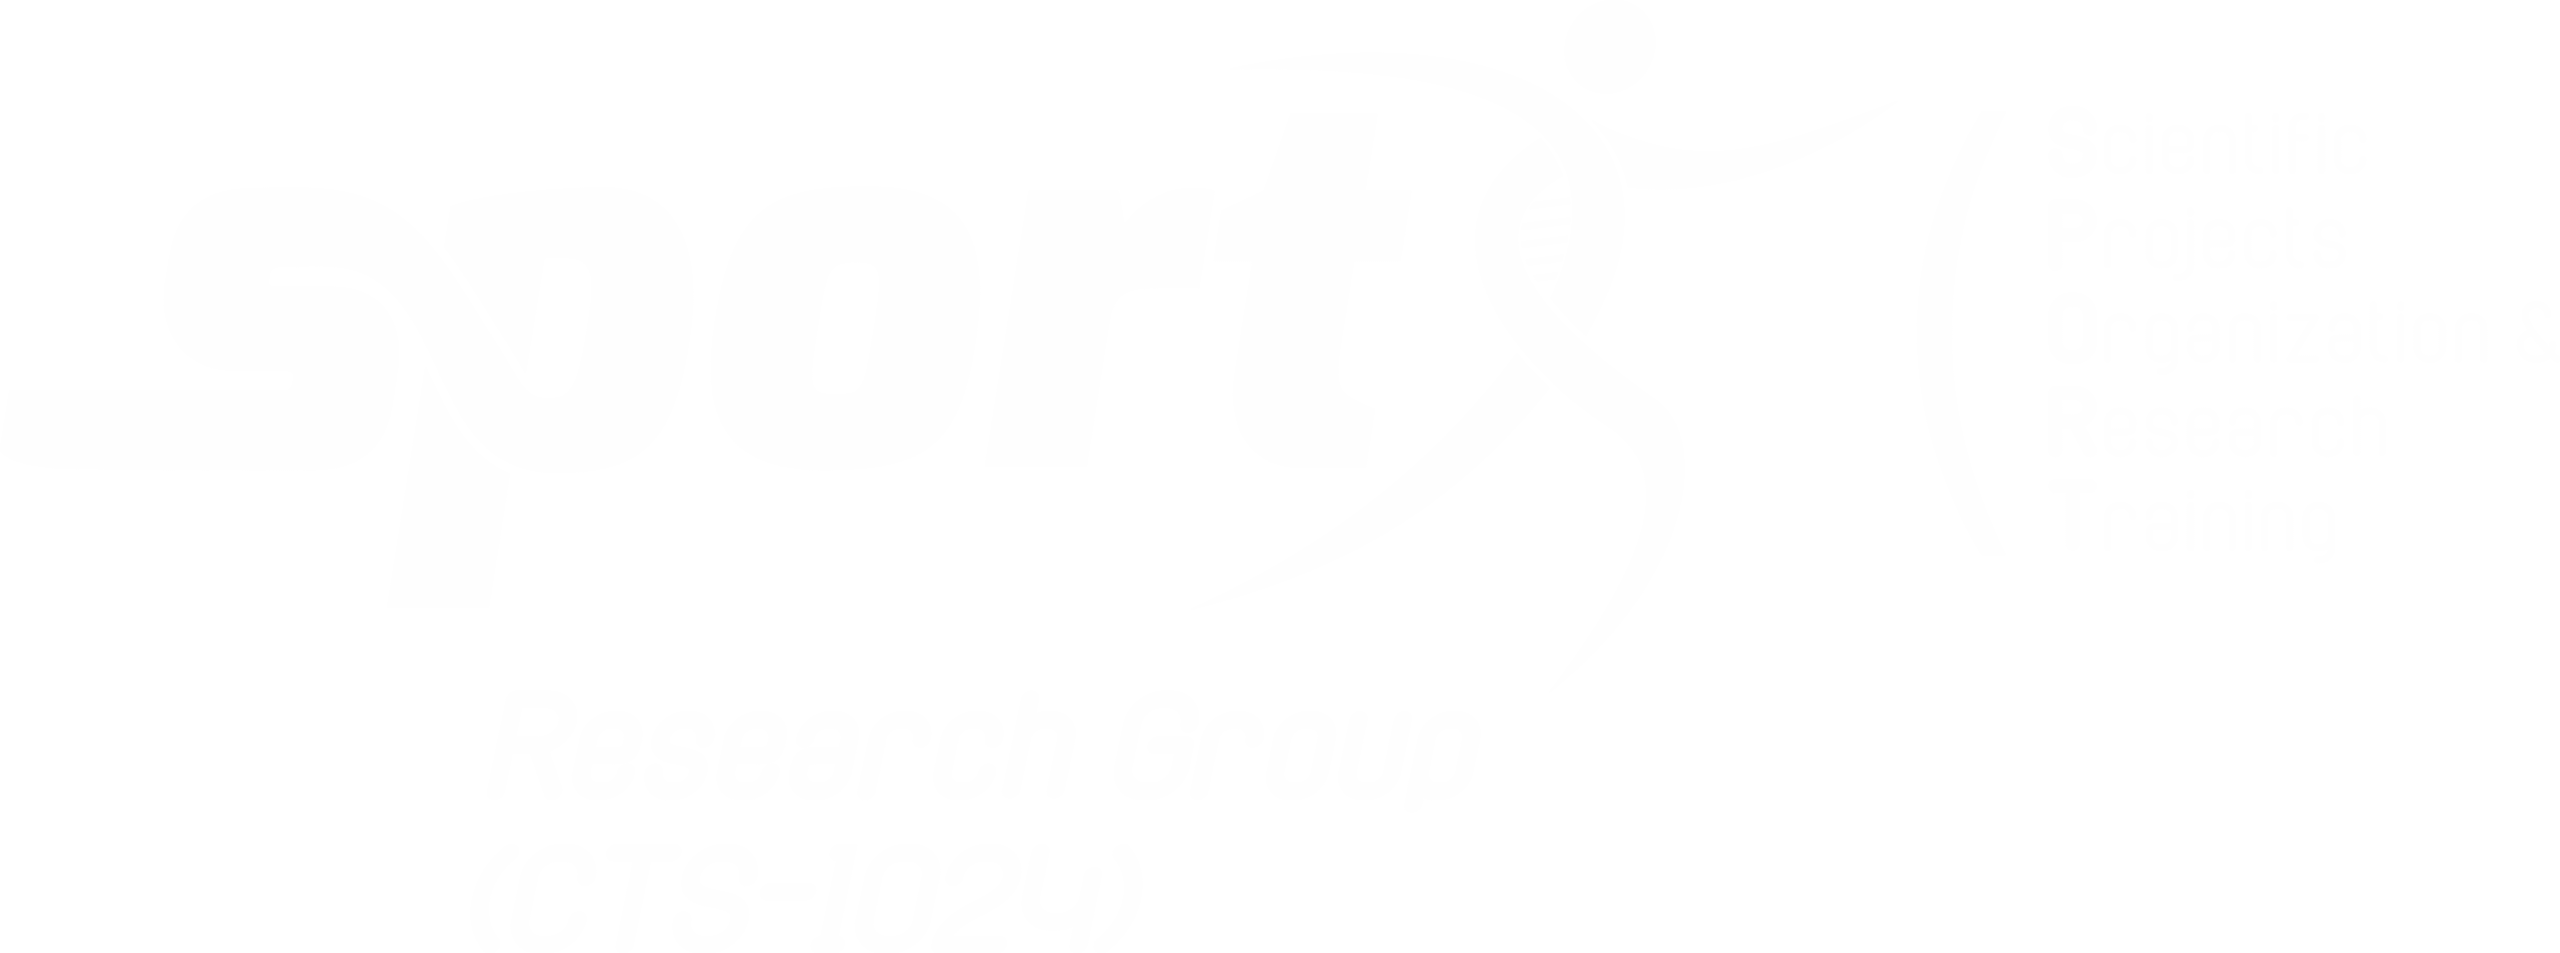 SPORT Research Group – CTS-1024